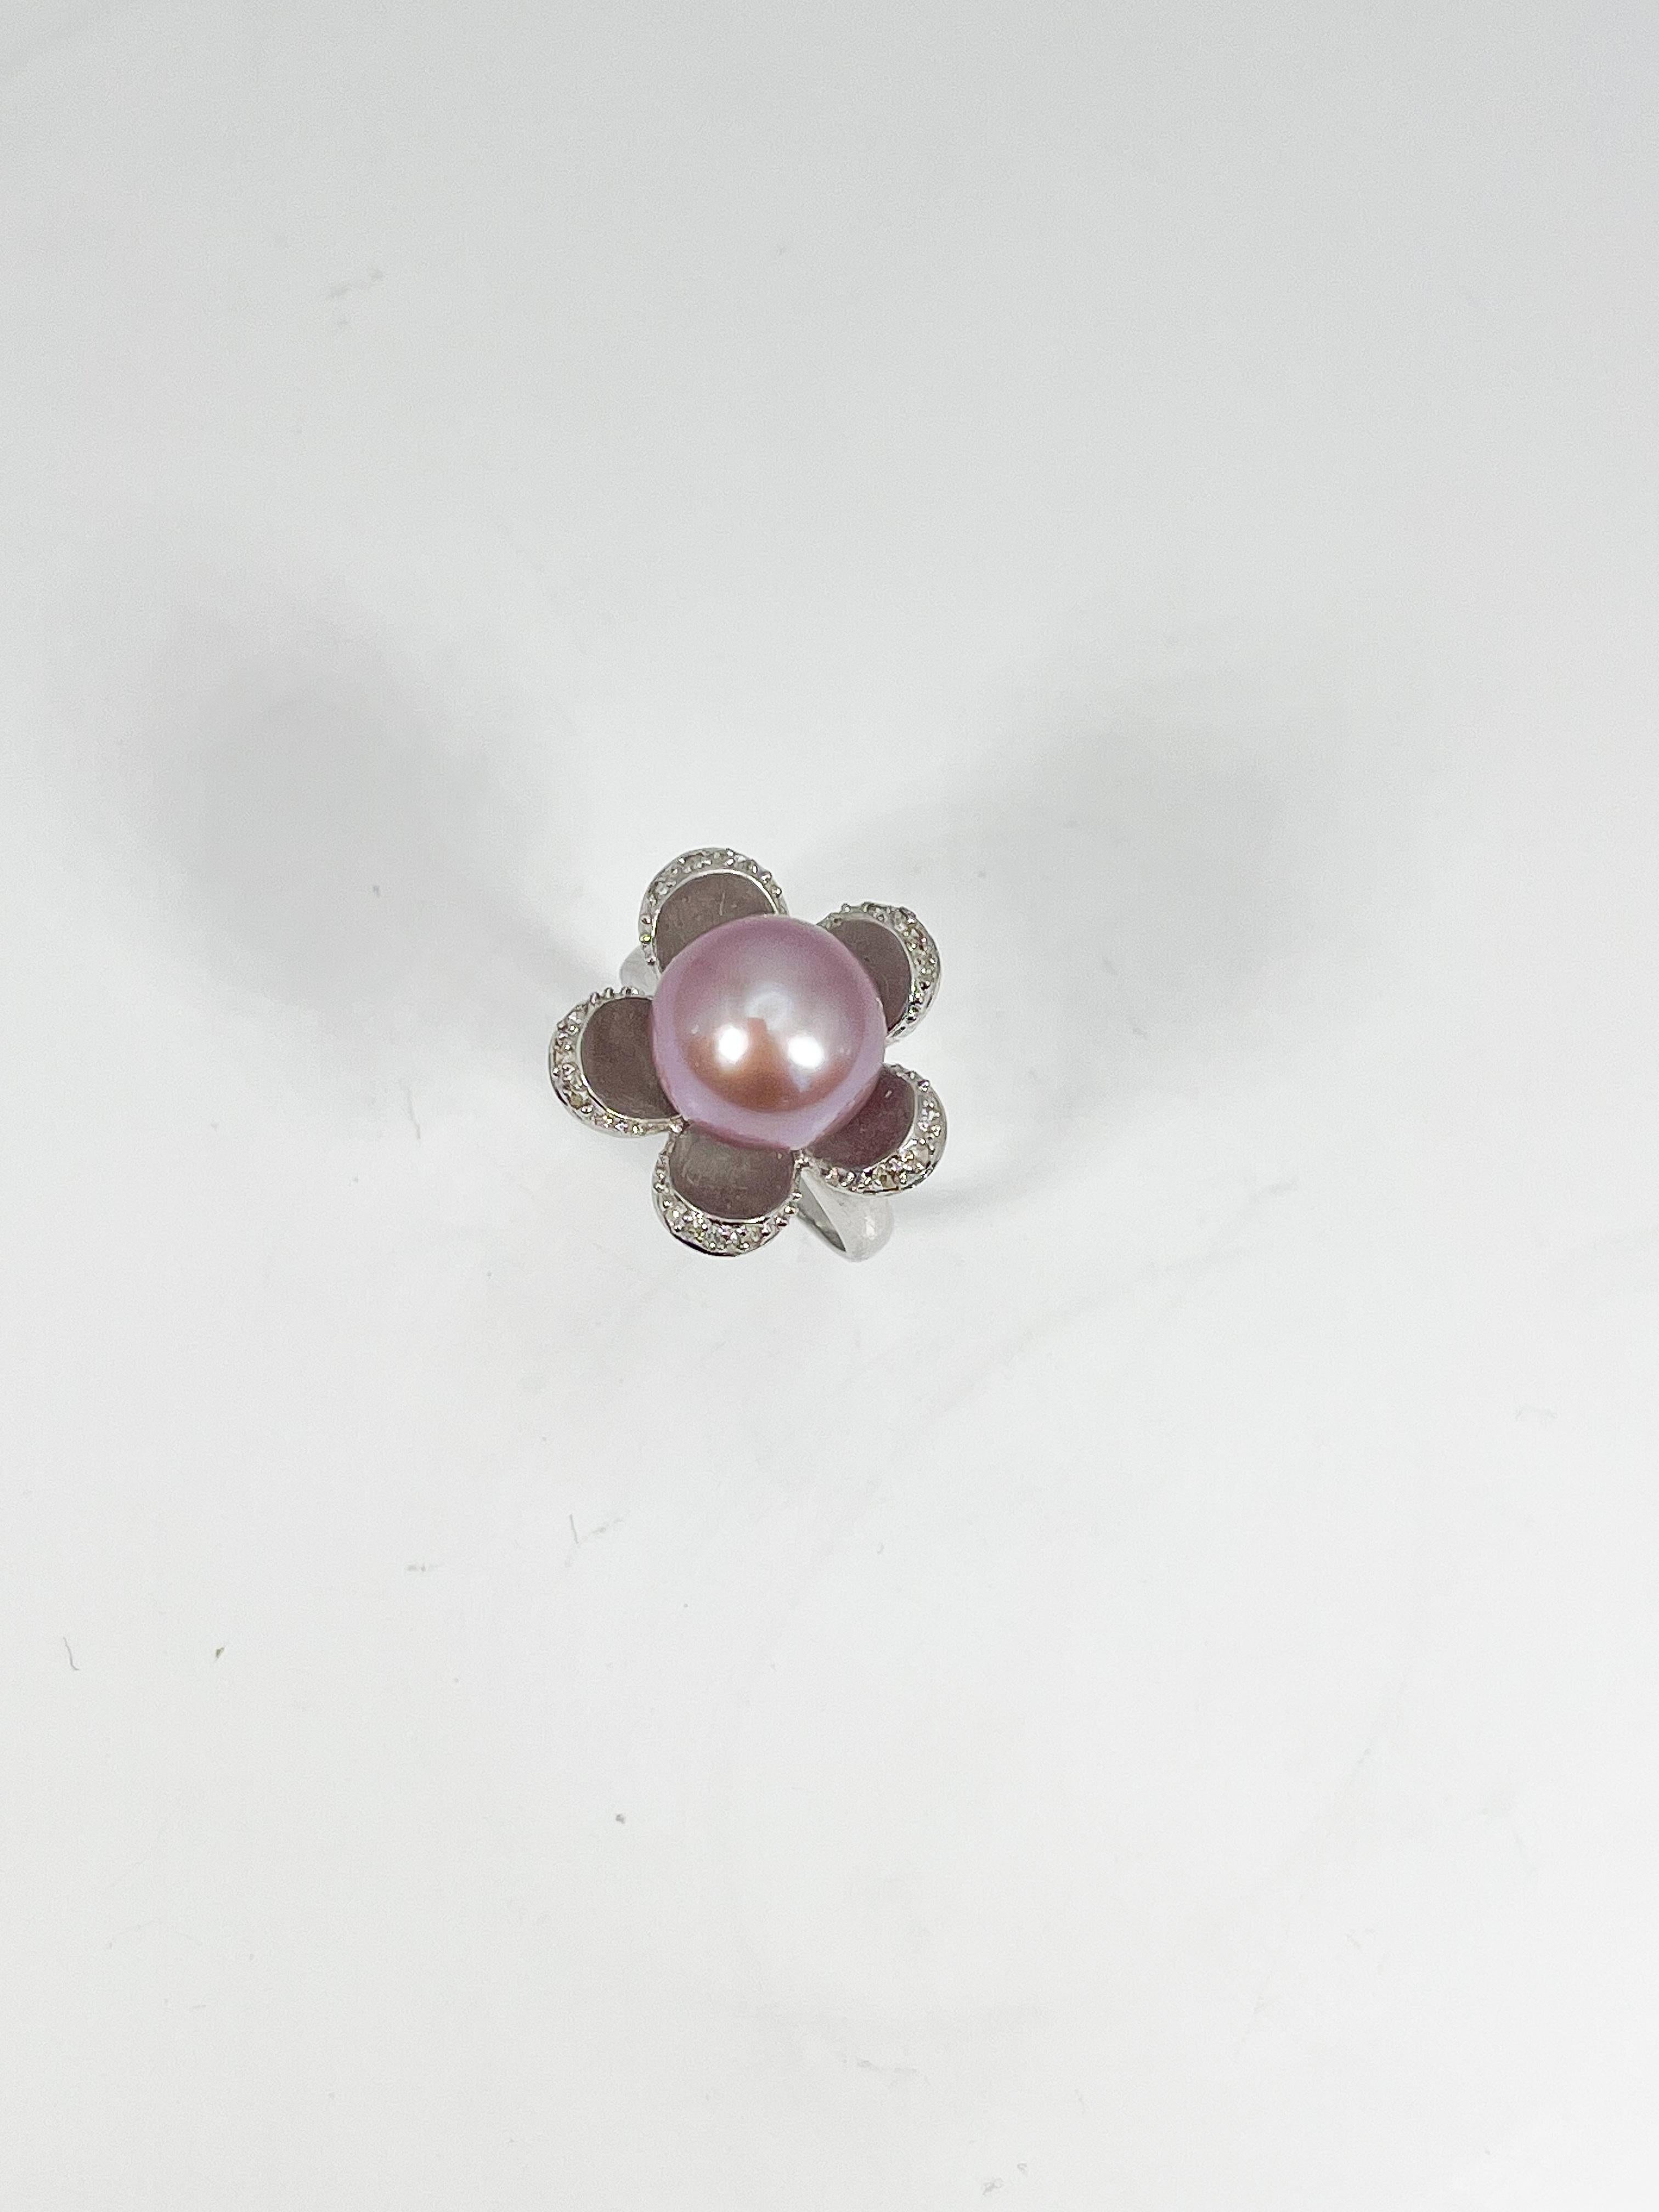 14k white gold pink cultured pearl and diamond flower ring. The diameter of the pearl is 10.8 mm, all diamonds in this ring are round, the ring size is 6 1/2, and it has a weight of 6.17 grams.